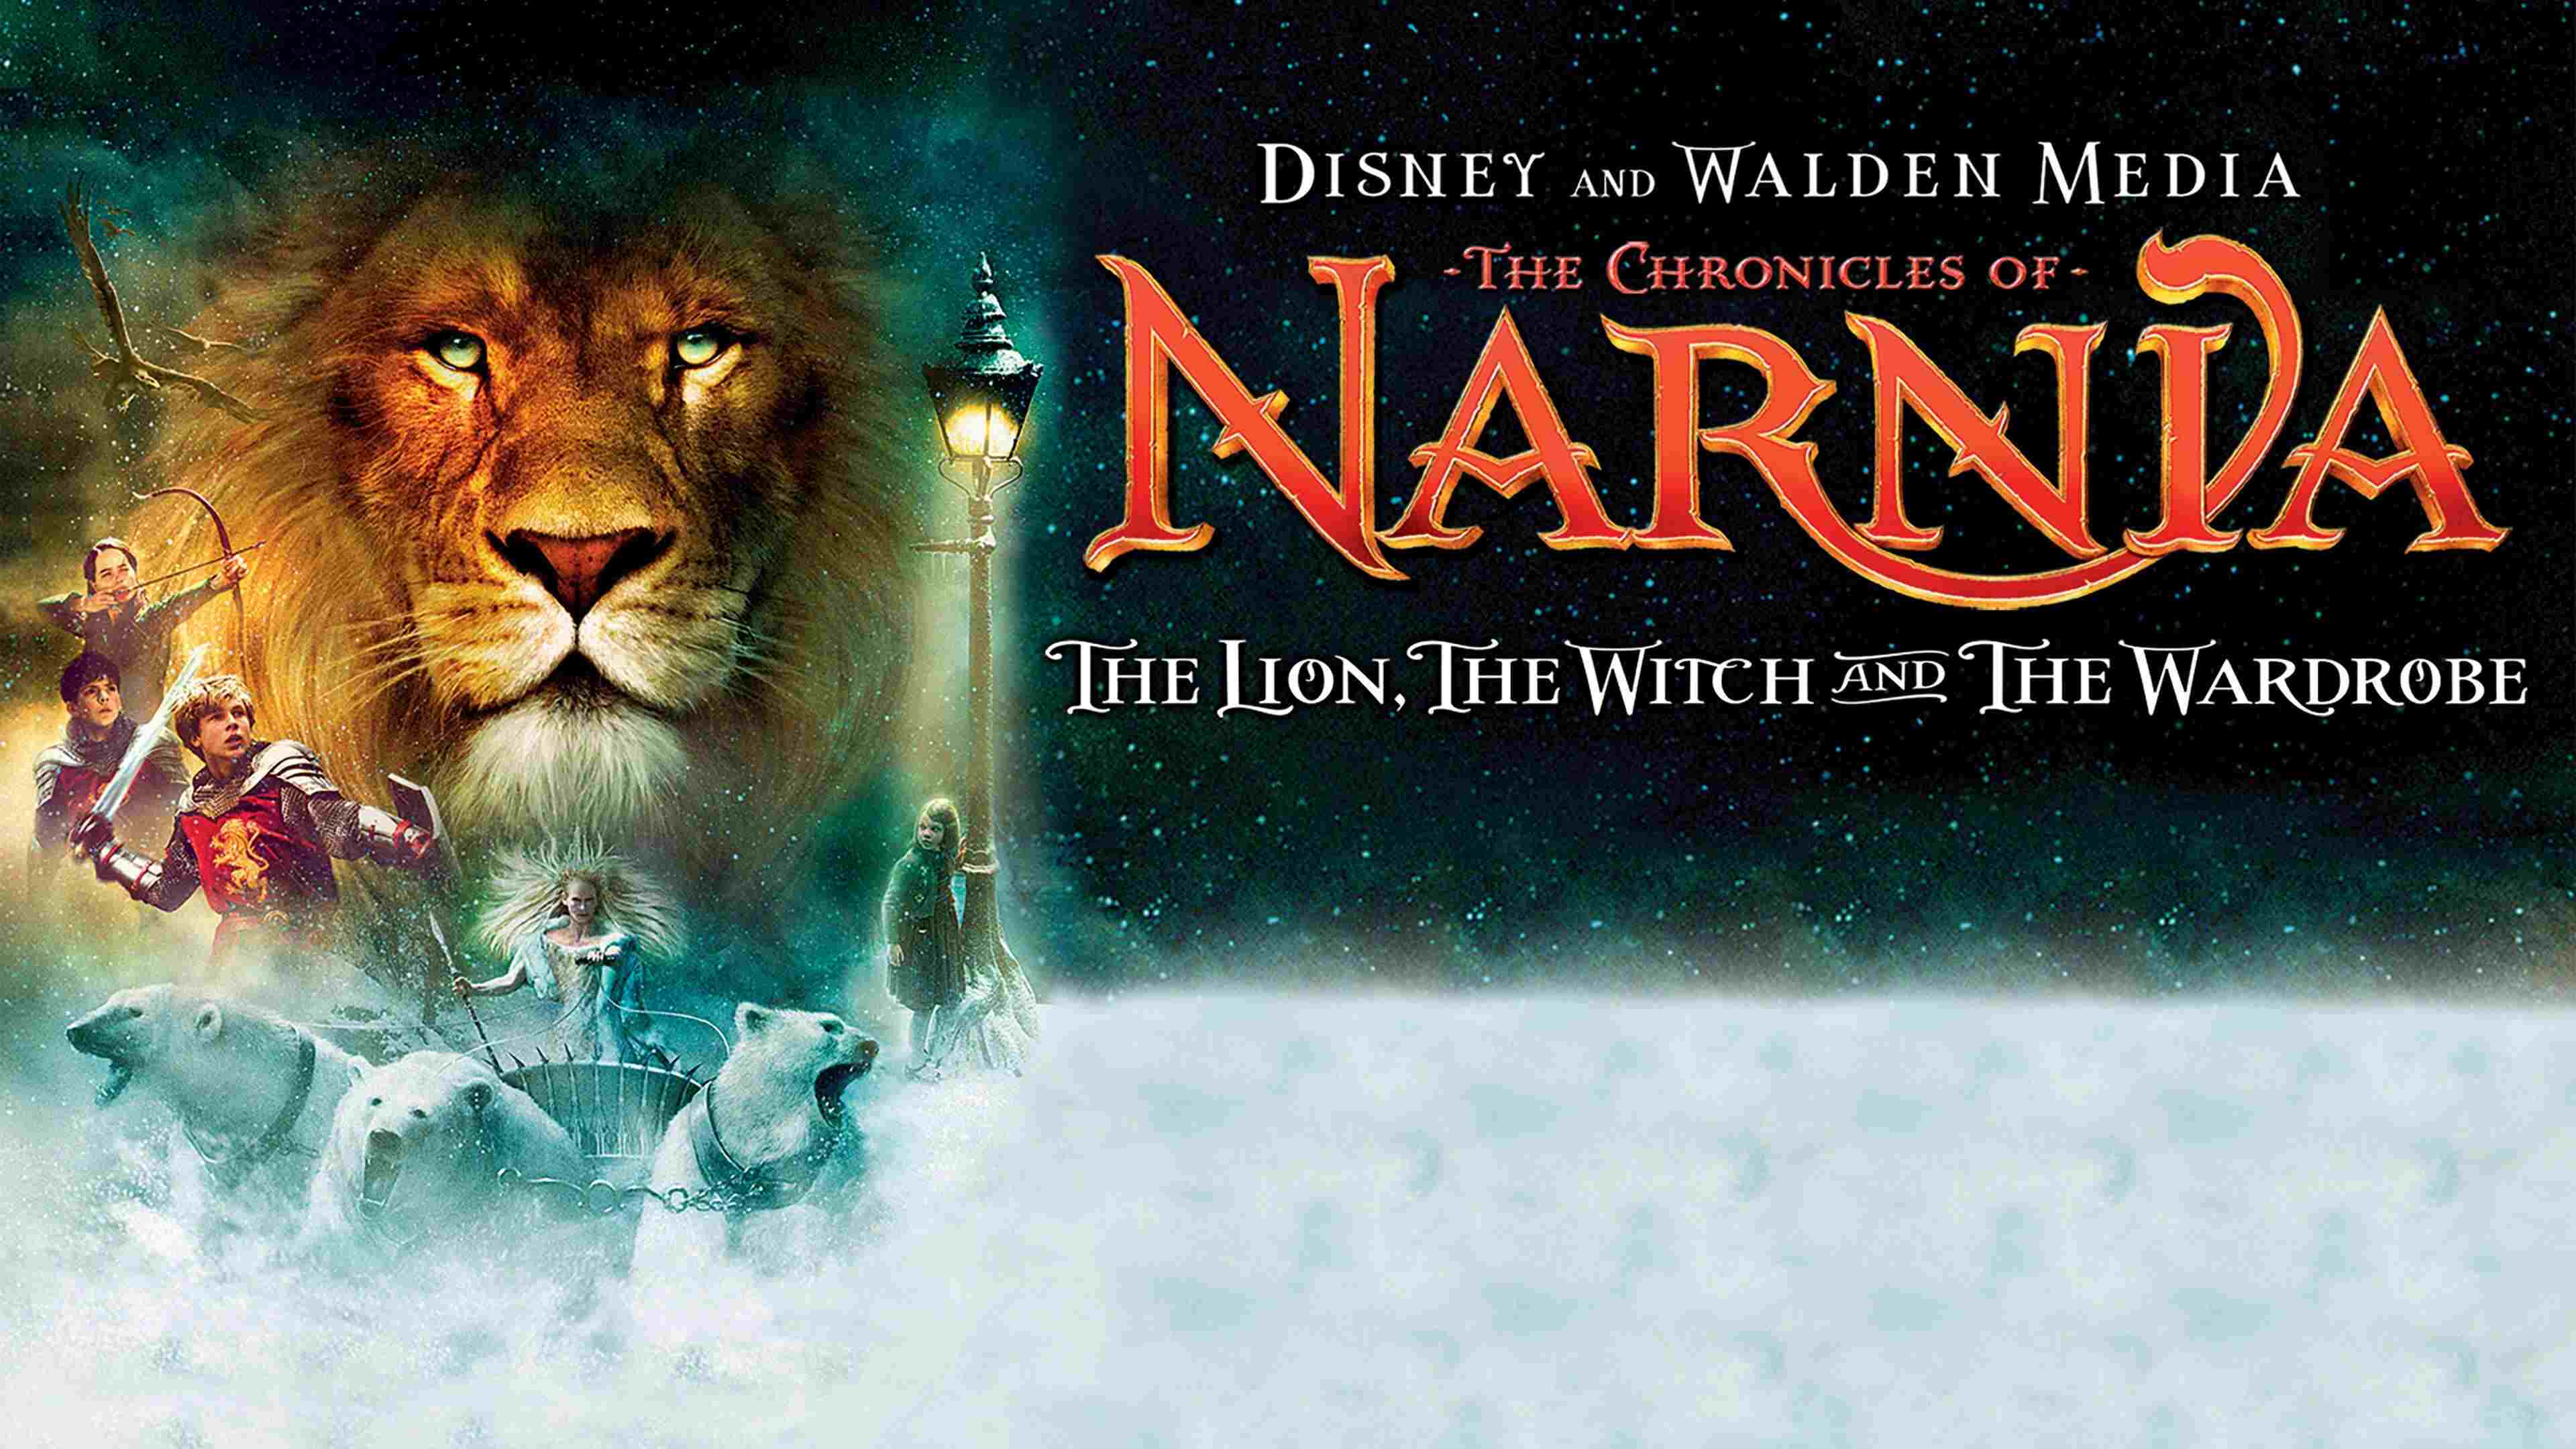 39-facts-about-the-movie-the-chronicles-of-narnia-the-lion-the-witch-and-the-wardrobe